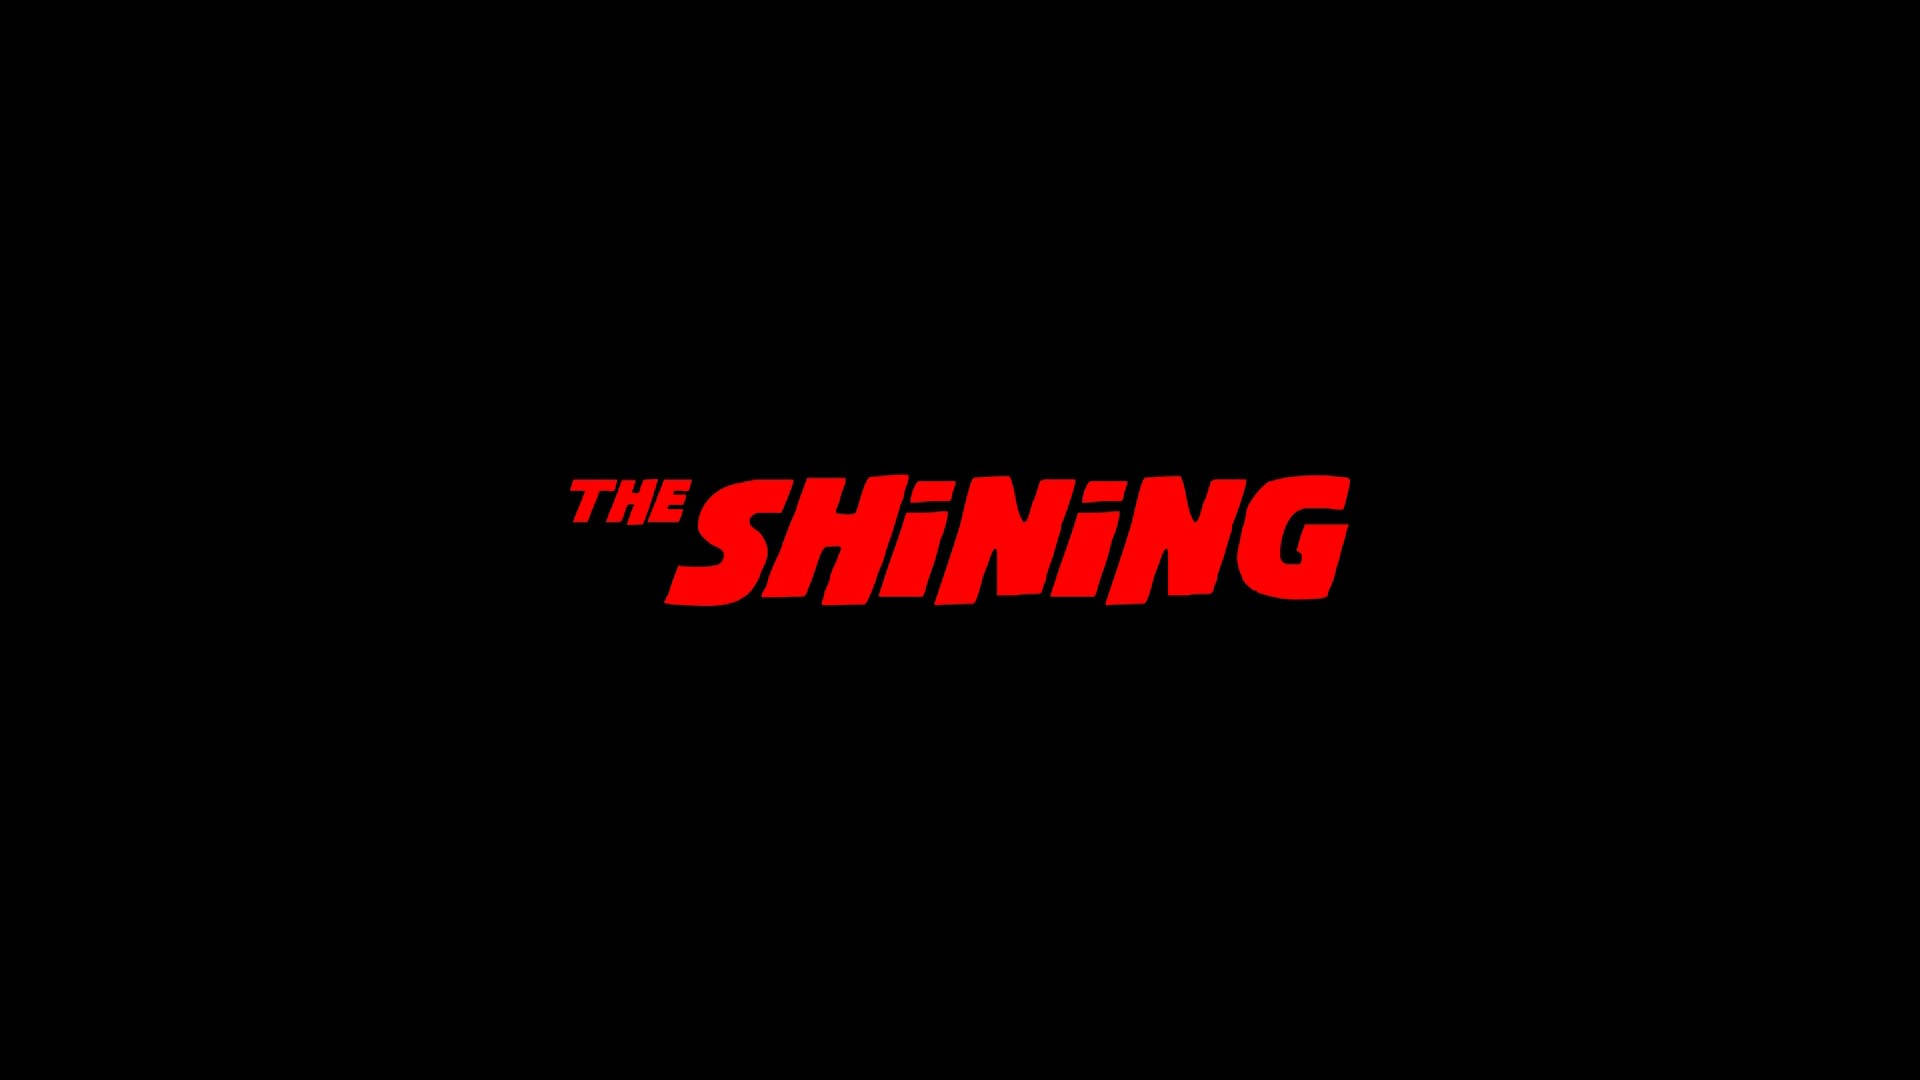 The Shining Text Poster Background